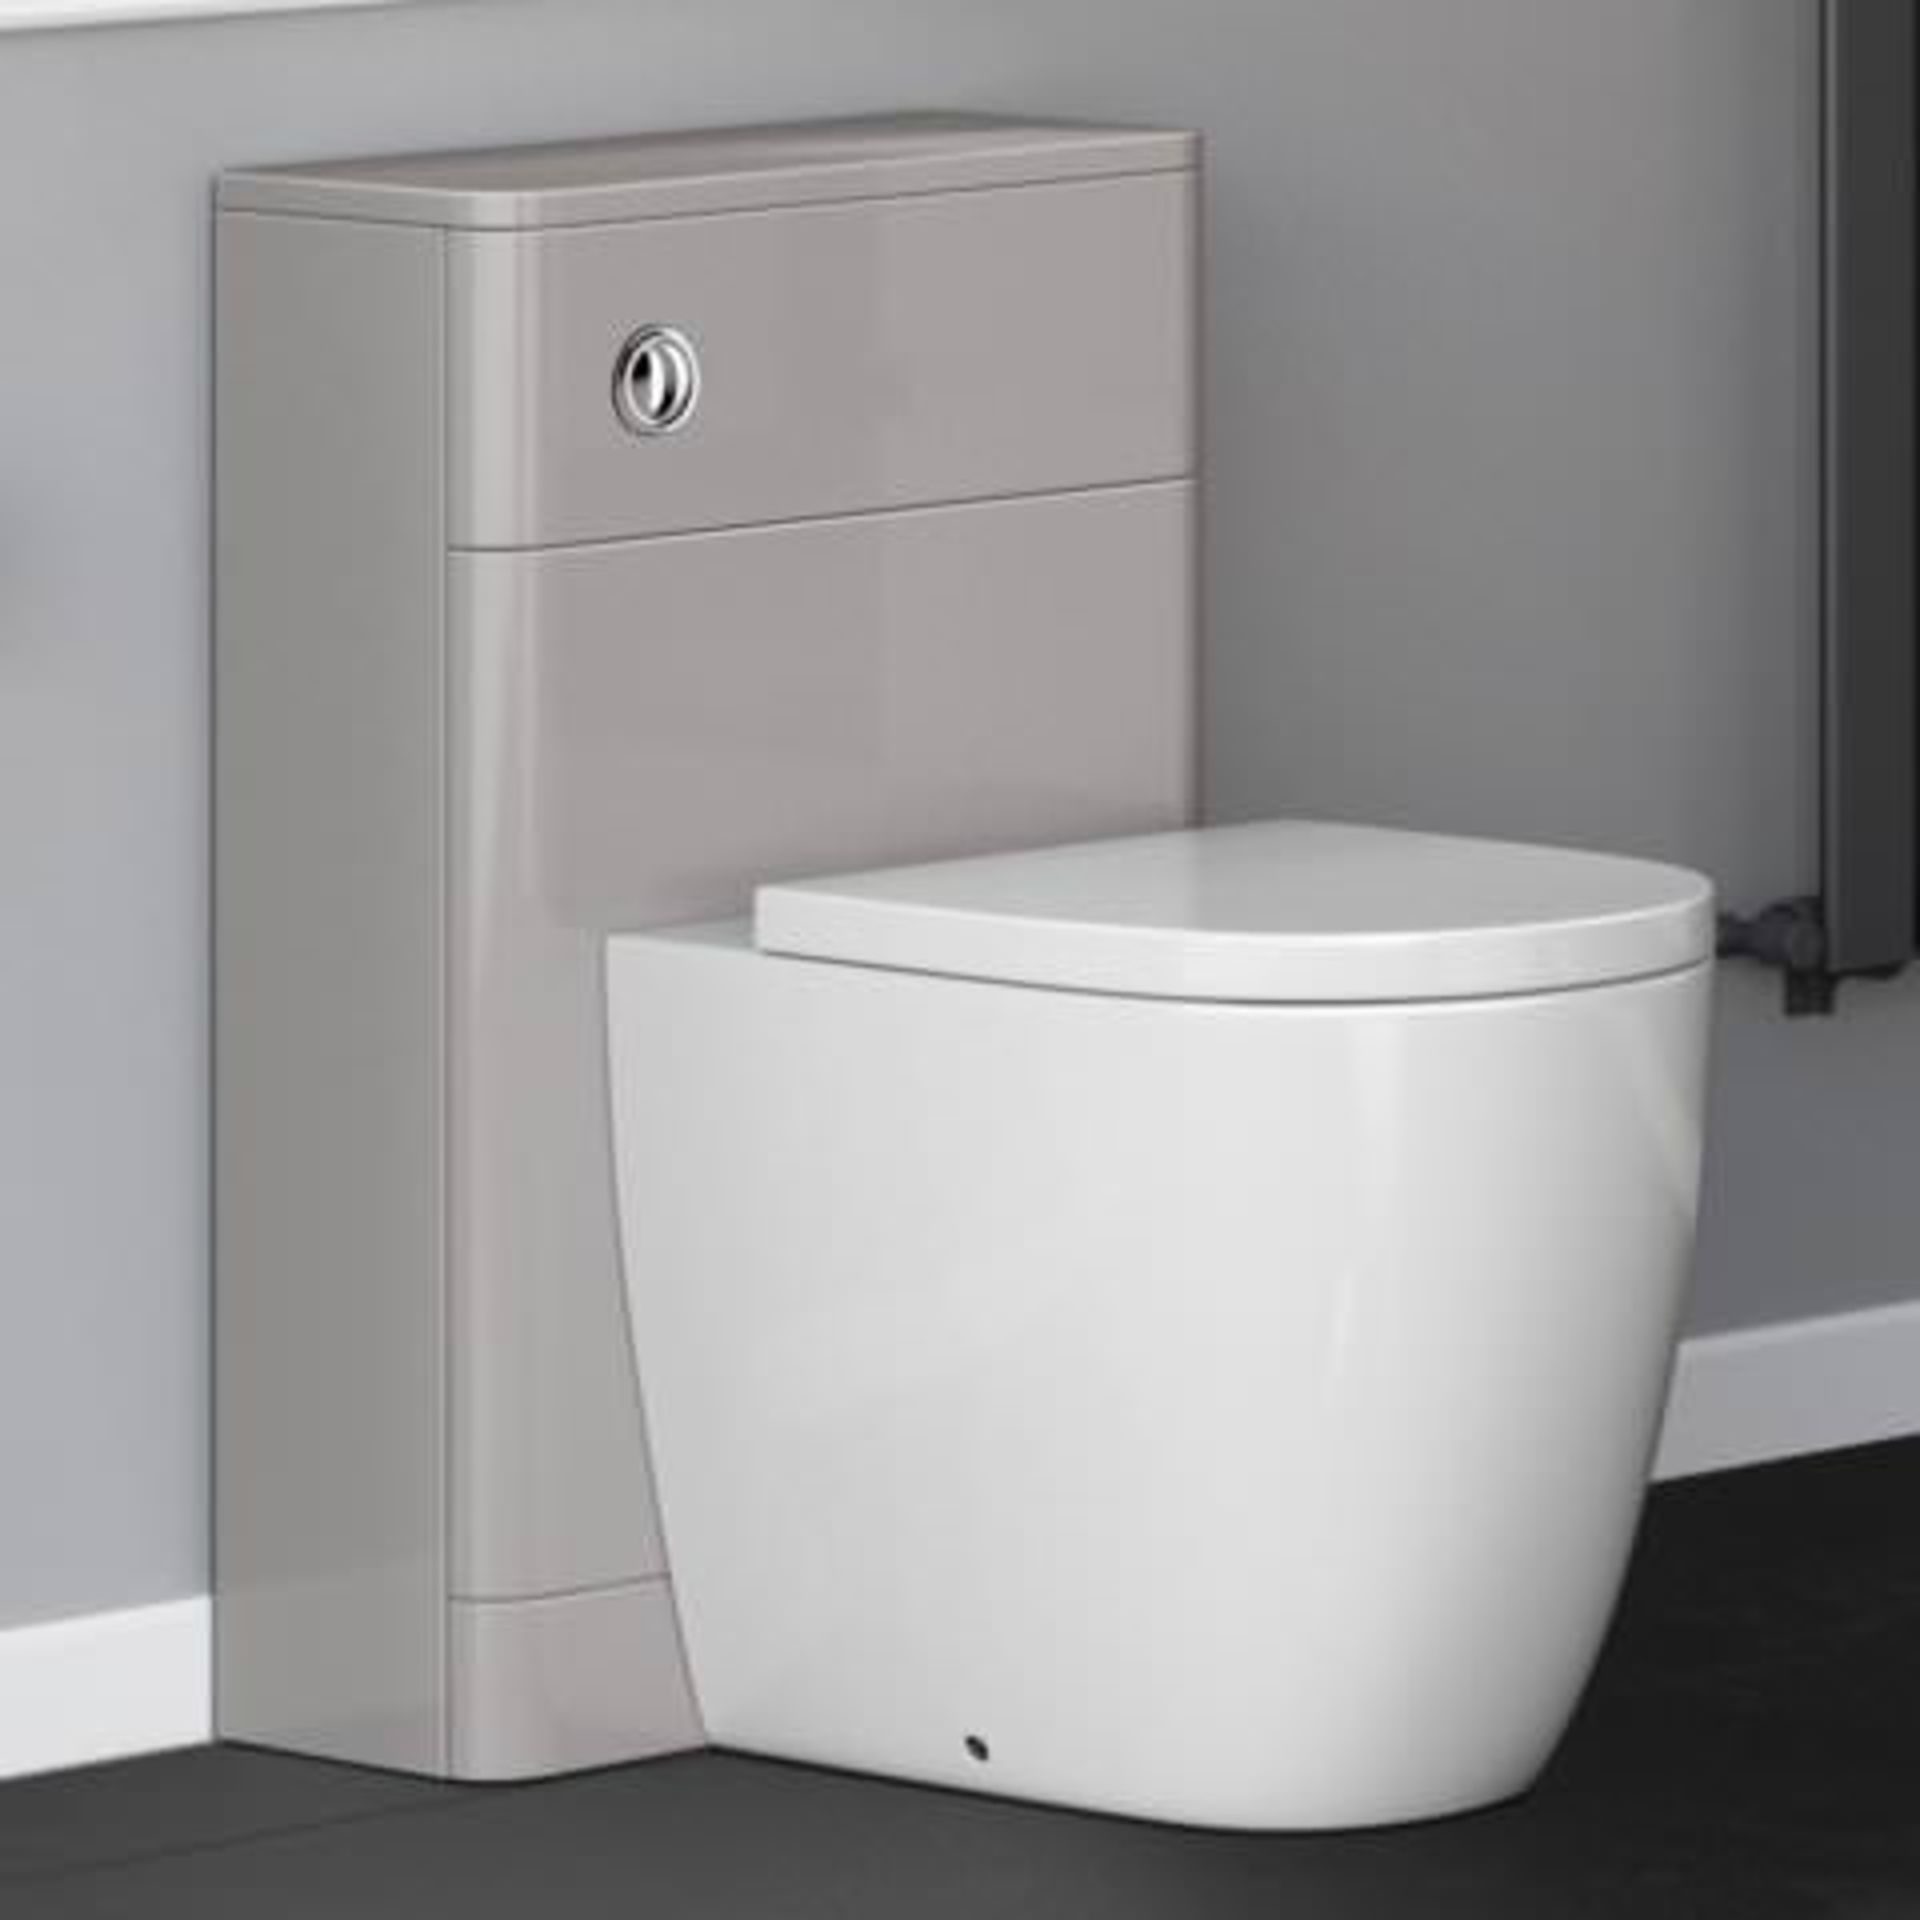 (O28) 500mm Gloss Latte Back To Wall Toilet Unit This Gloss Latte 500mm Back To Wall Toilet Unit - Image 2 of 4